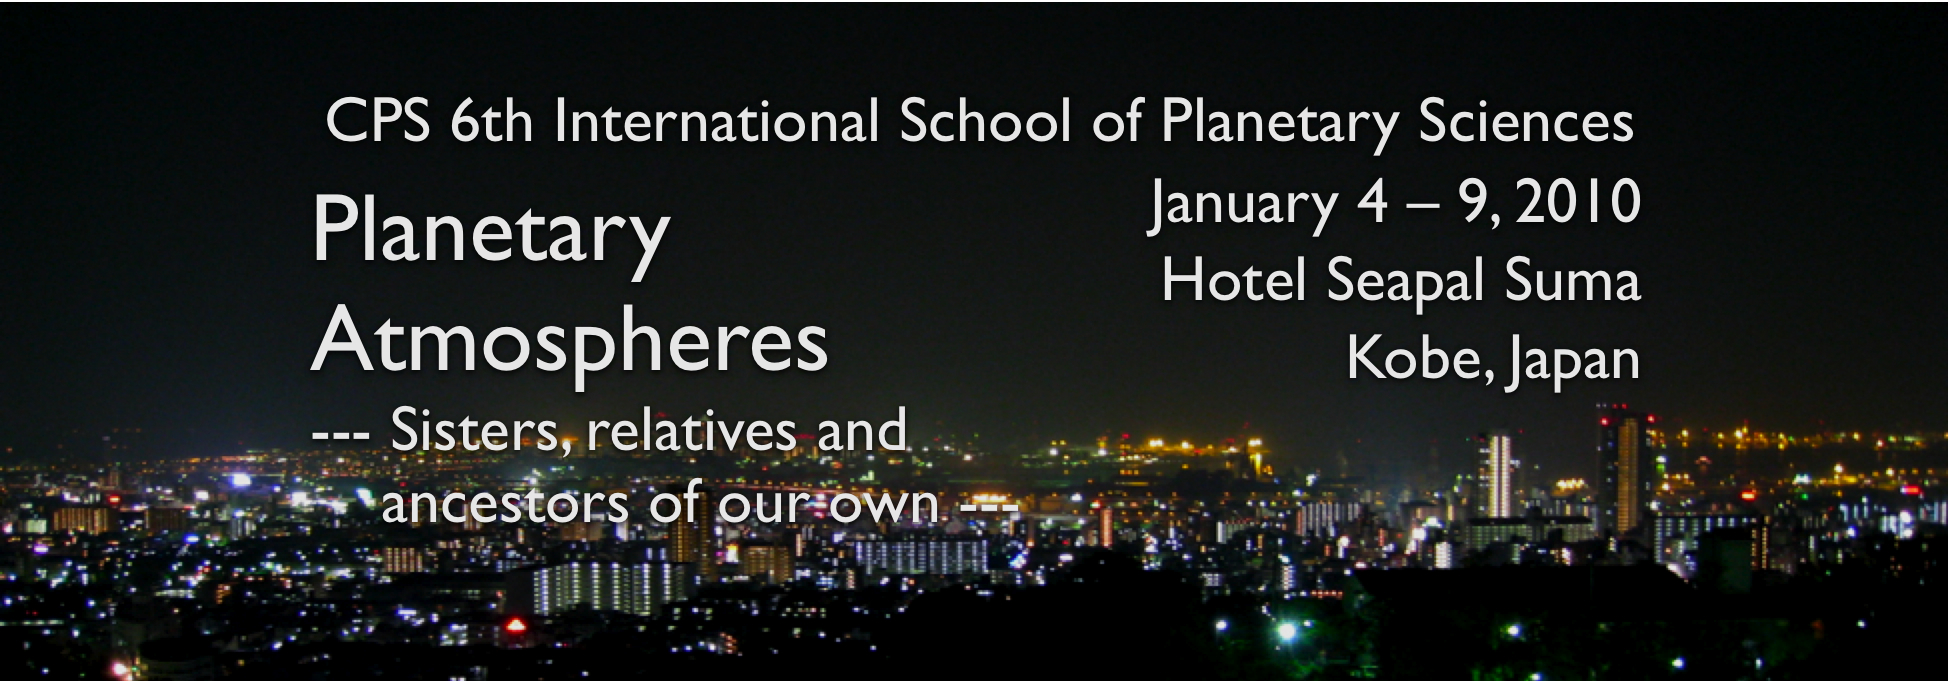 1st CPS Planetary School